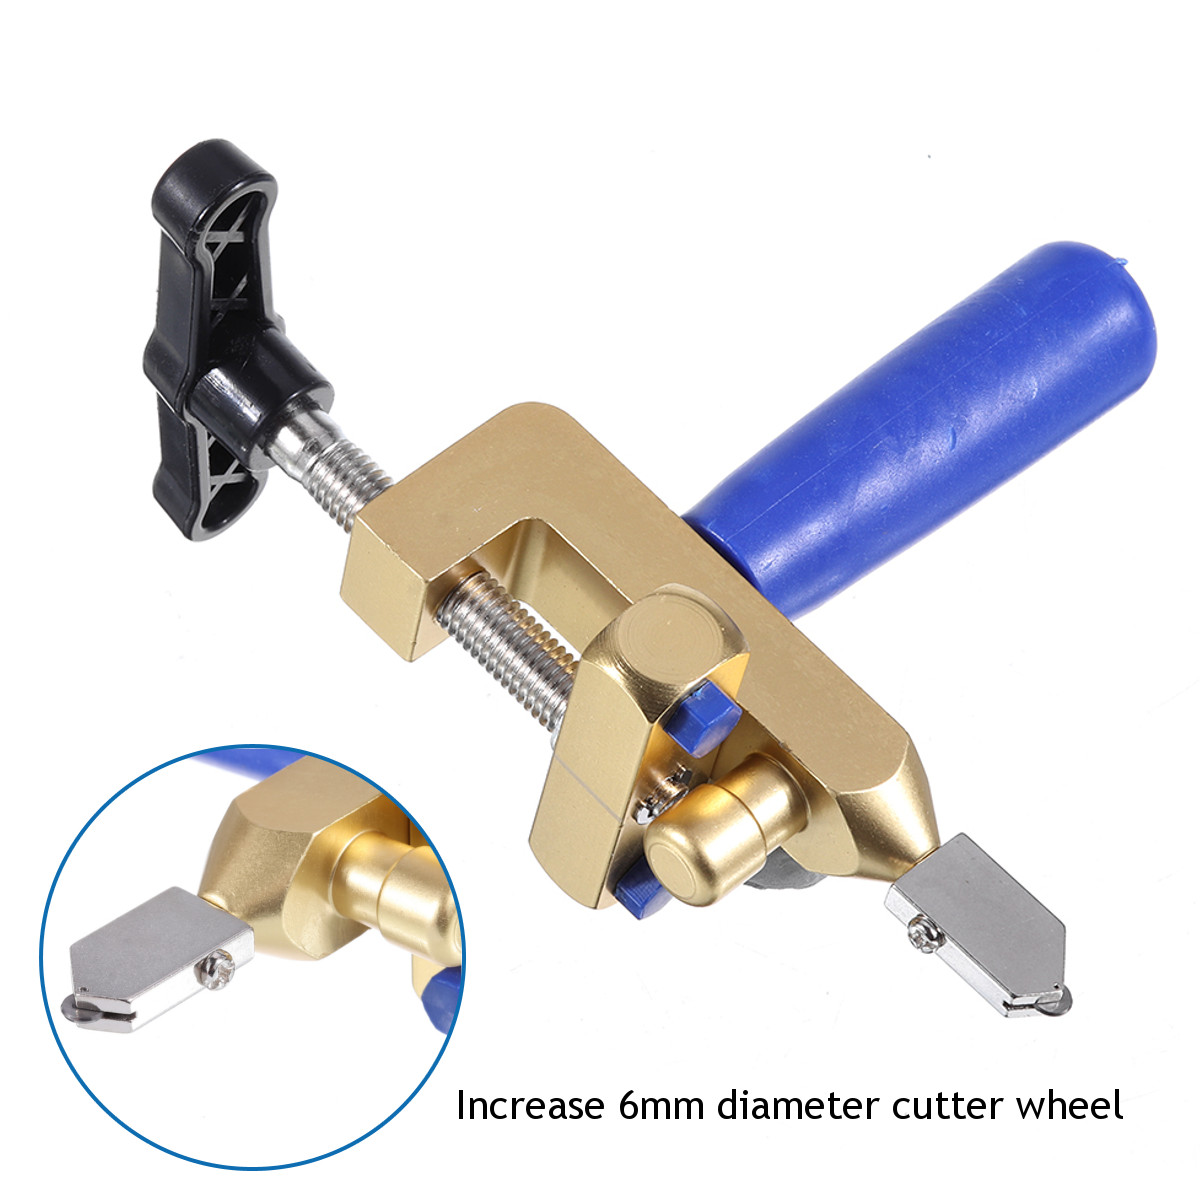 Drillpro-2-In-1-Multifunctional-Ceramic-Tile-Glass-Cutter-Aluminum-Alloy-Mirror-Cutting-Tool-1641232-6